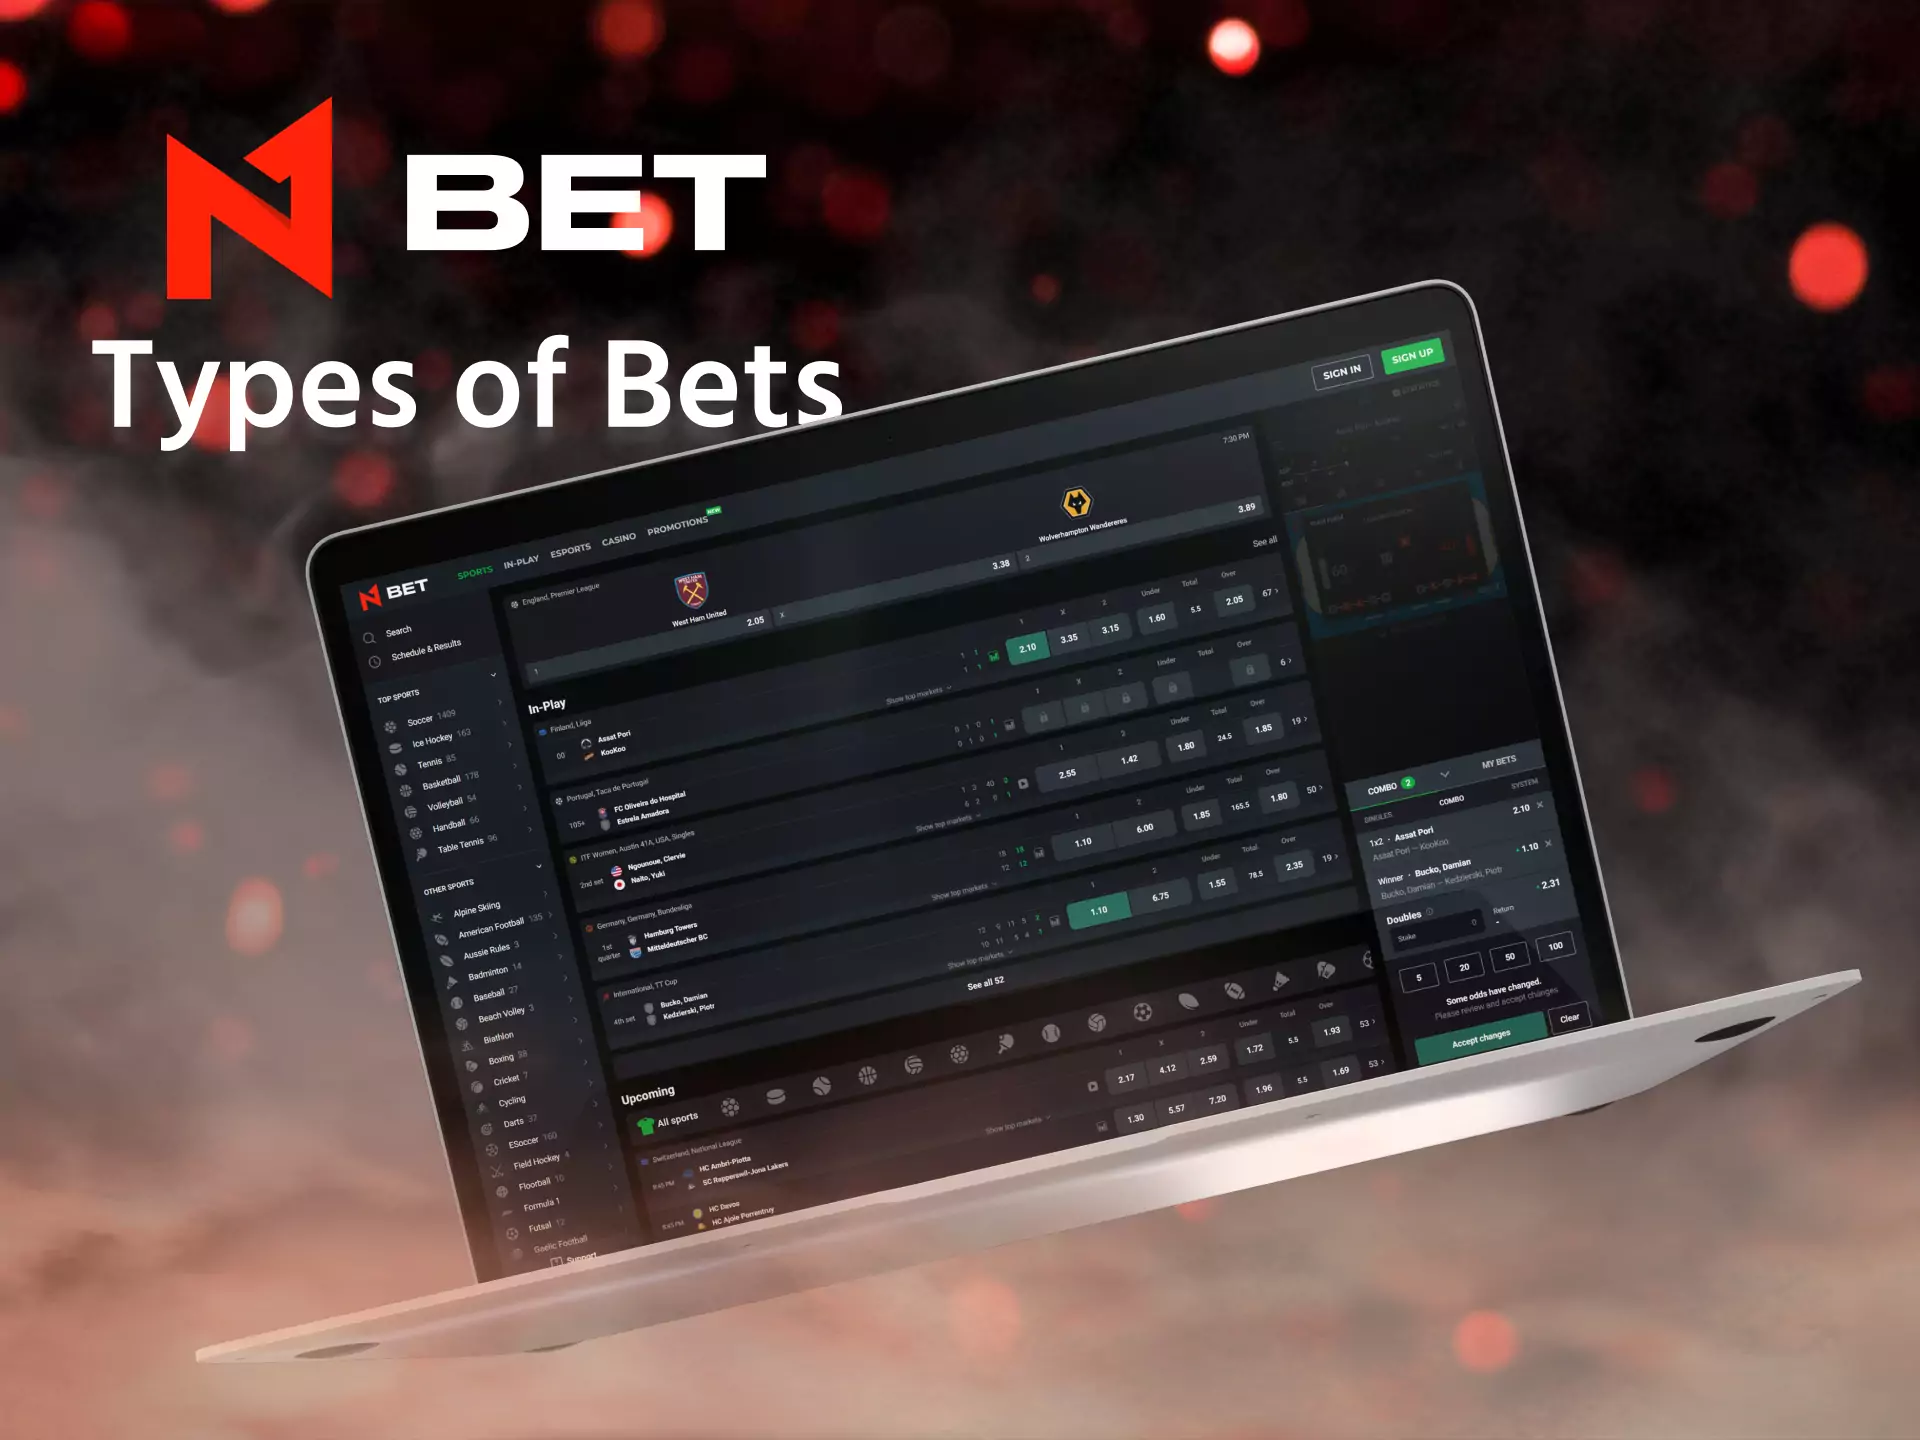 Place bets of various types in N1Bet.